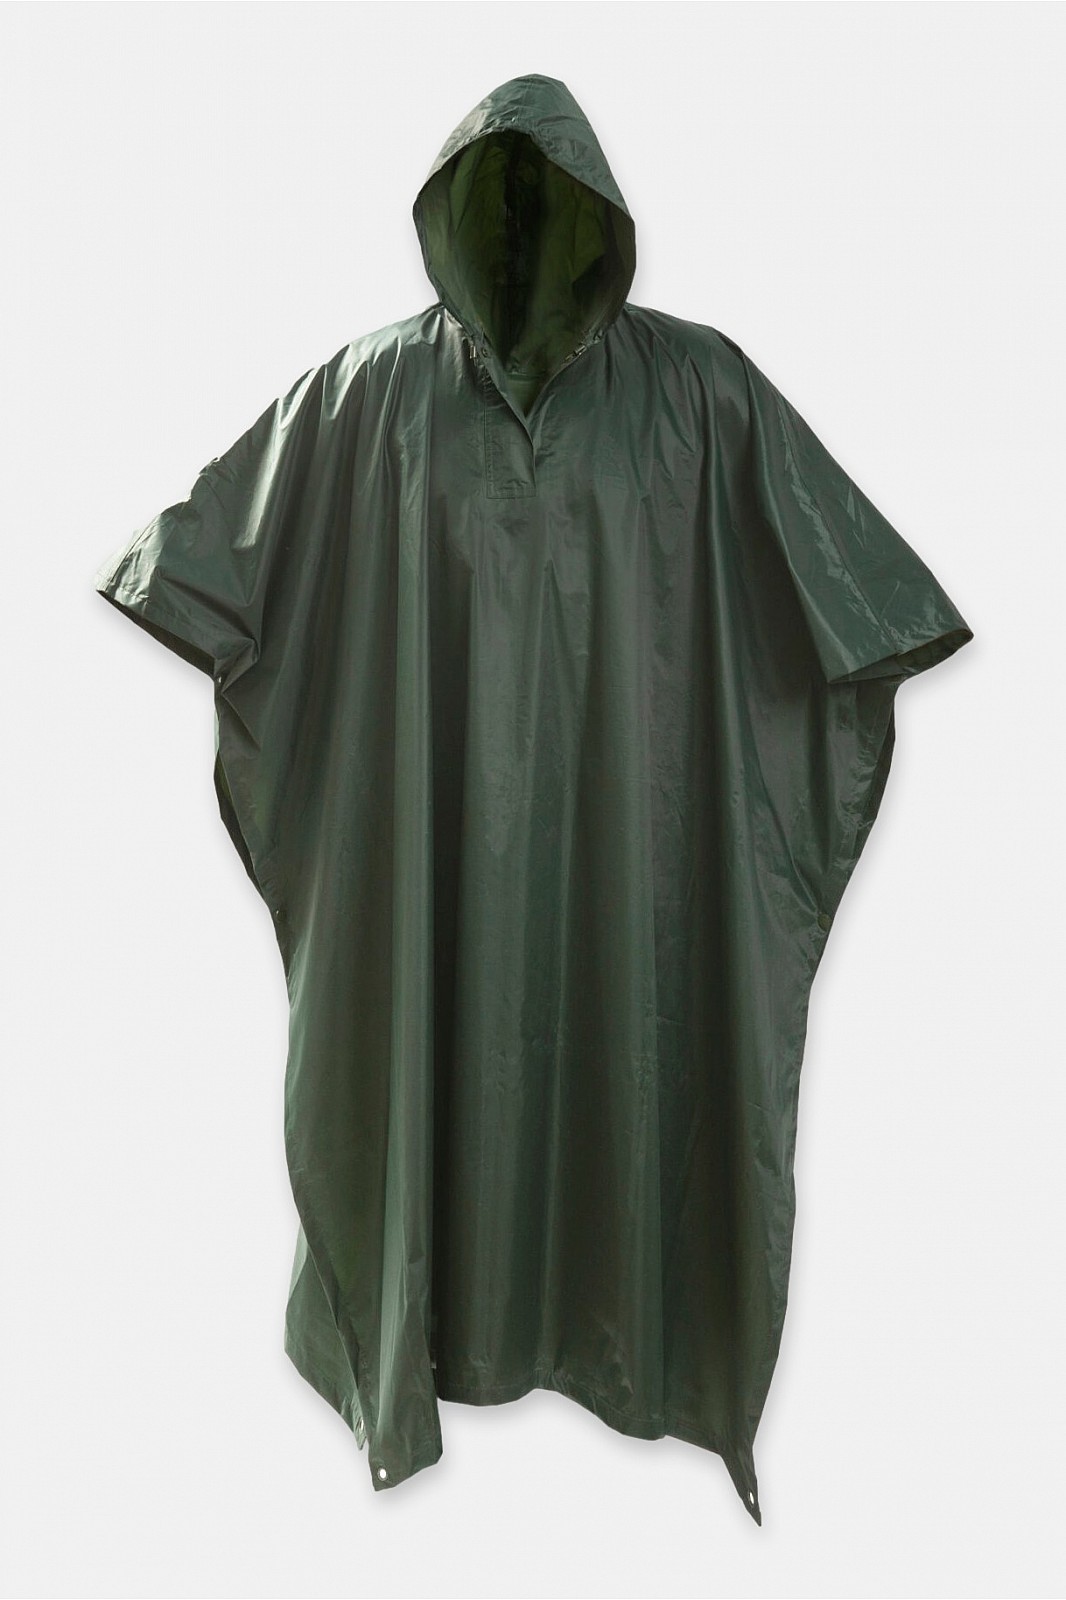 Wasserdichter Poncho Army Race 170T Polyester